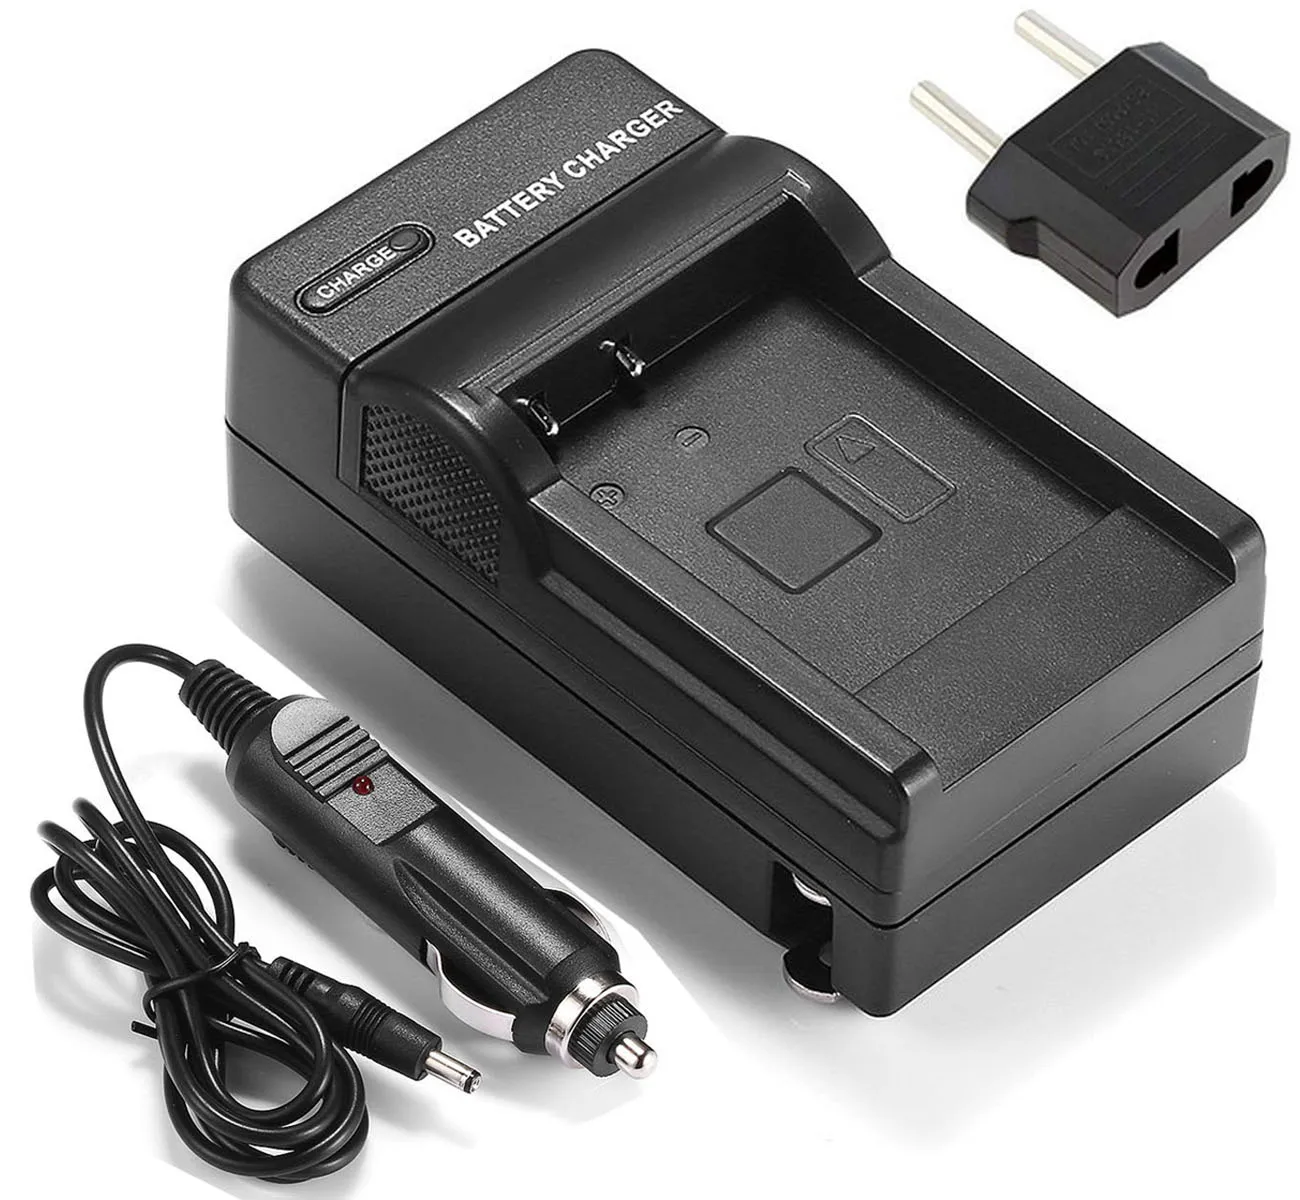 PV-GS35 Battery Pack for Panasonic PV-GS34 PV-GS39 Camcorder PV-GS36 